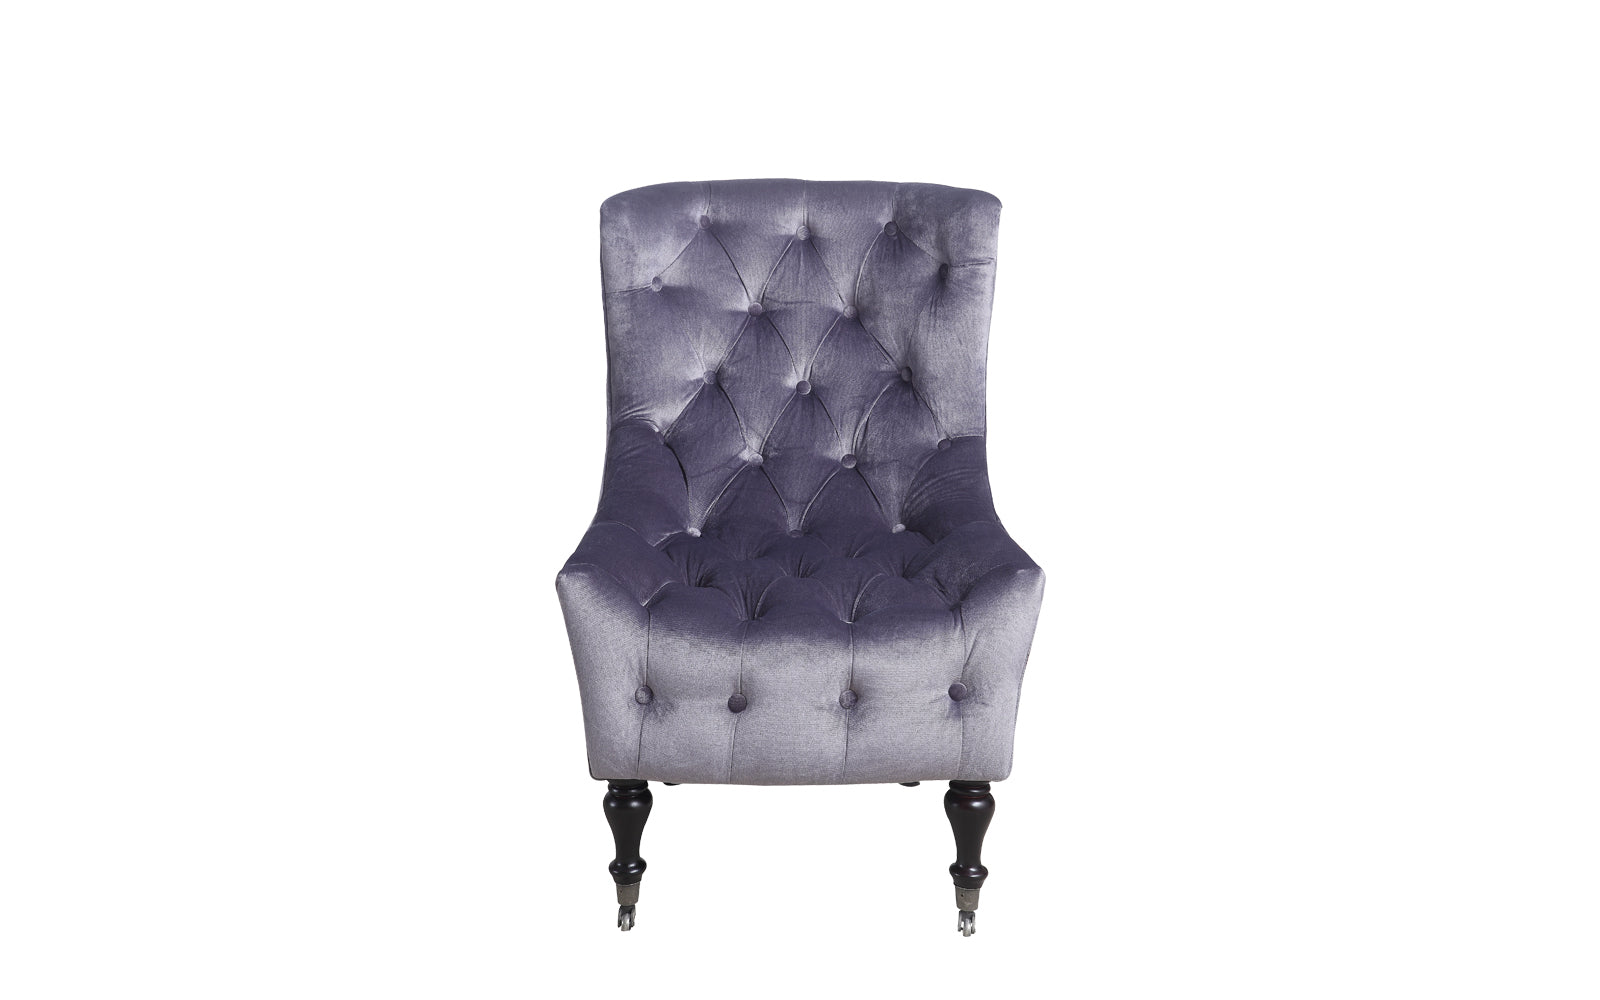 Ennio Classic Tufted Velvet Armchair with Casters